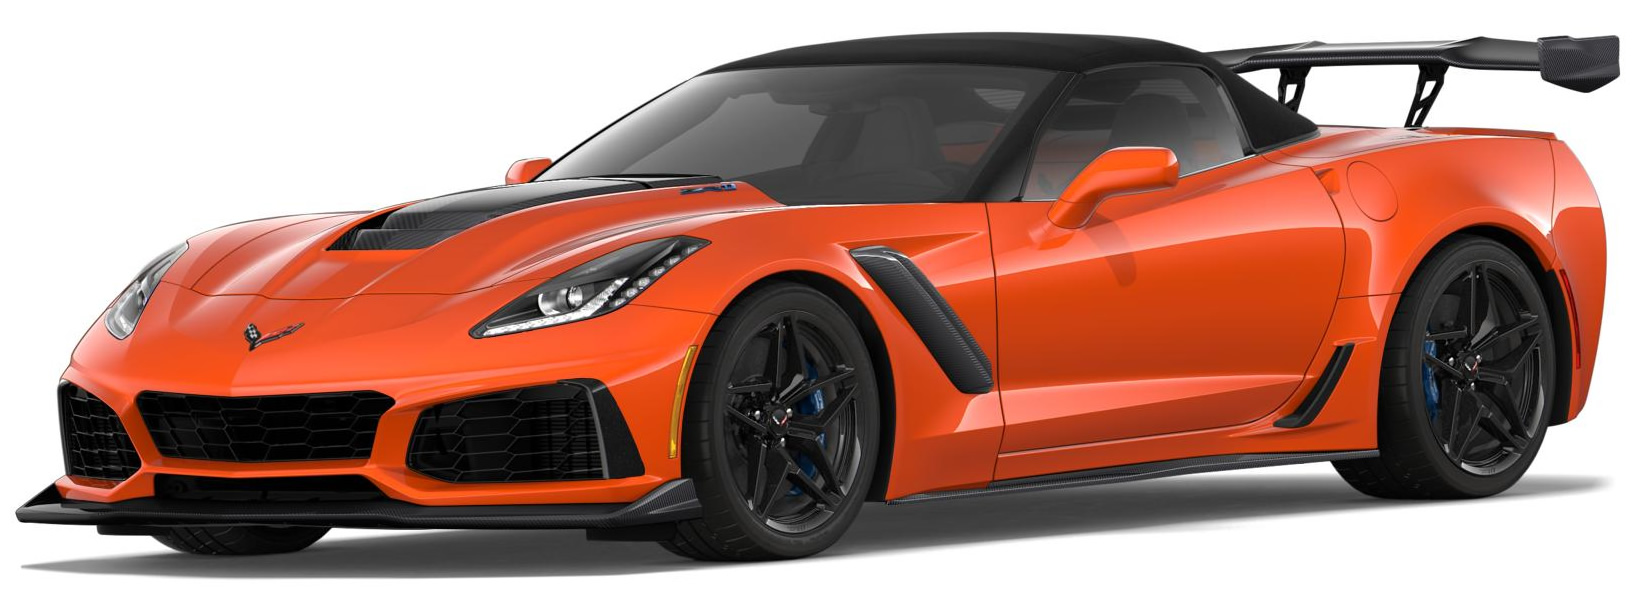 2019 Corvette ZR1 Convertible in Sebring Orange Metallic with the ZTK Track Performance Package